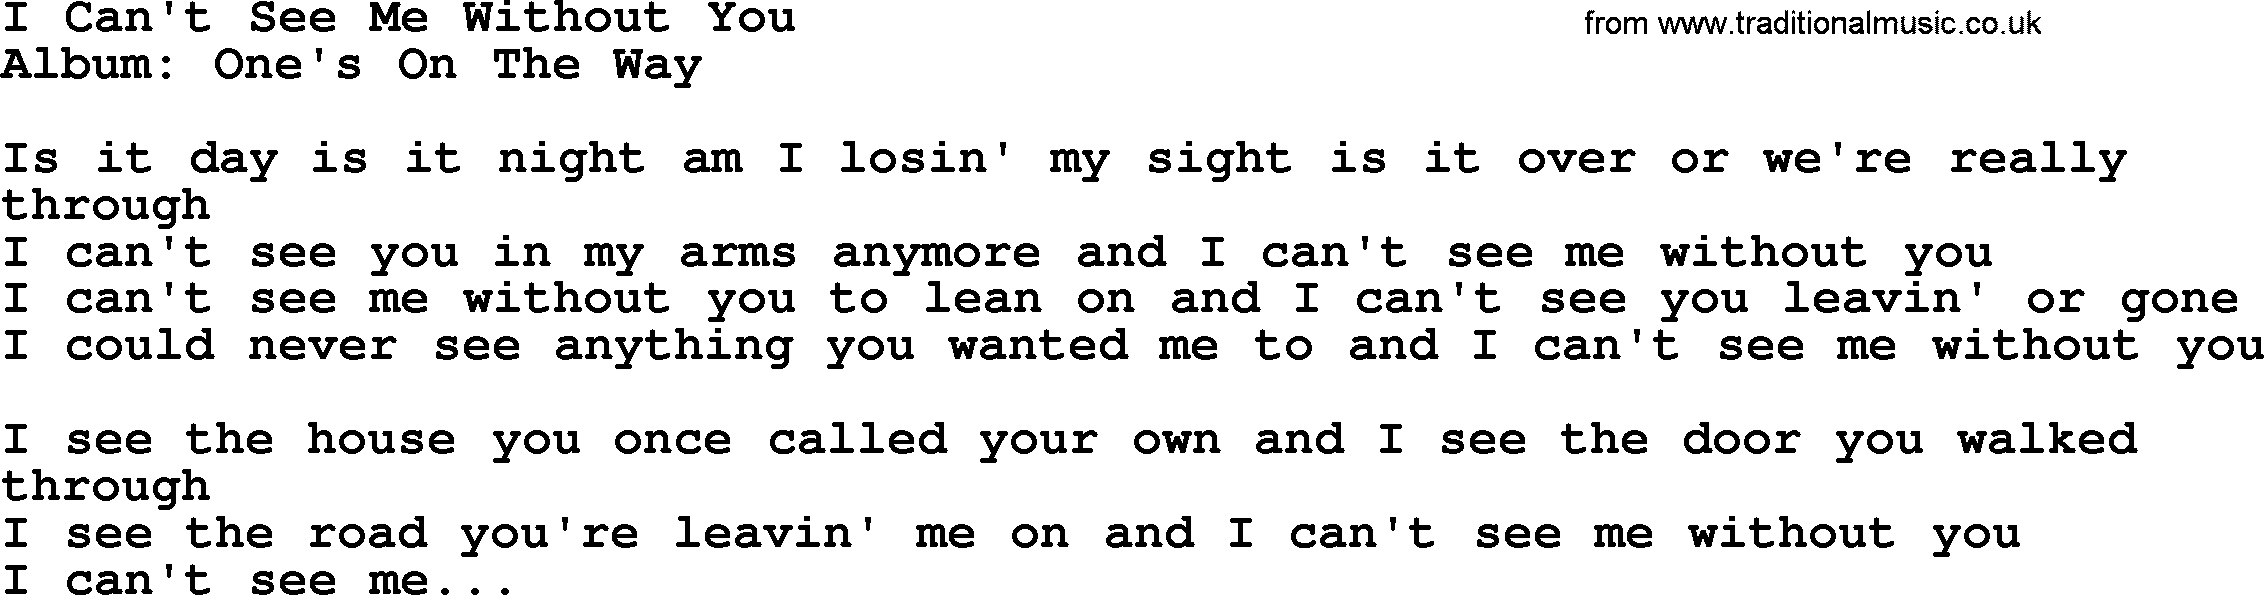 Loretta Lynn song: I Can't See Me Without You lyrics